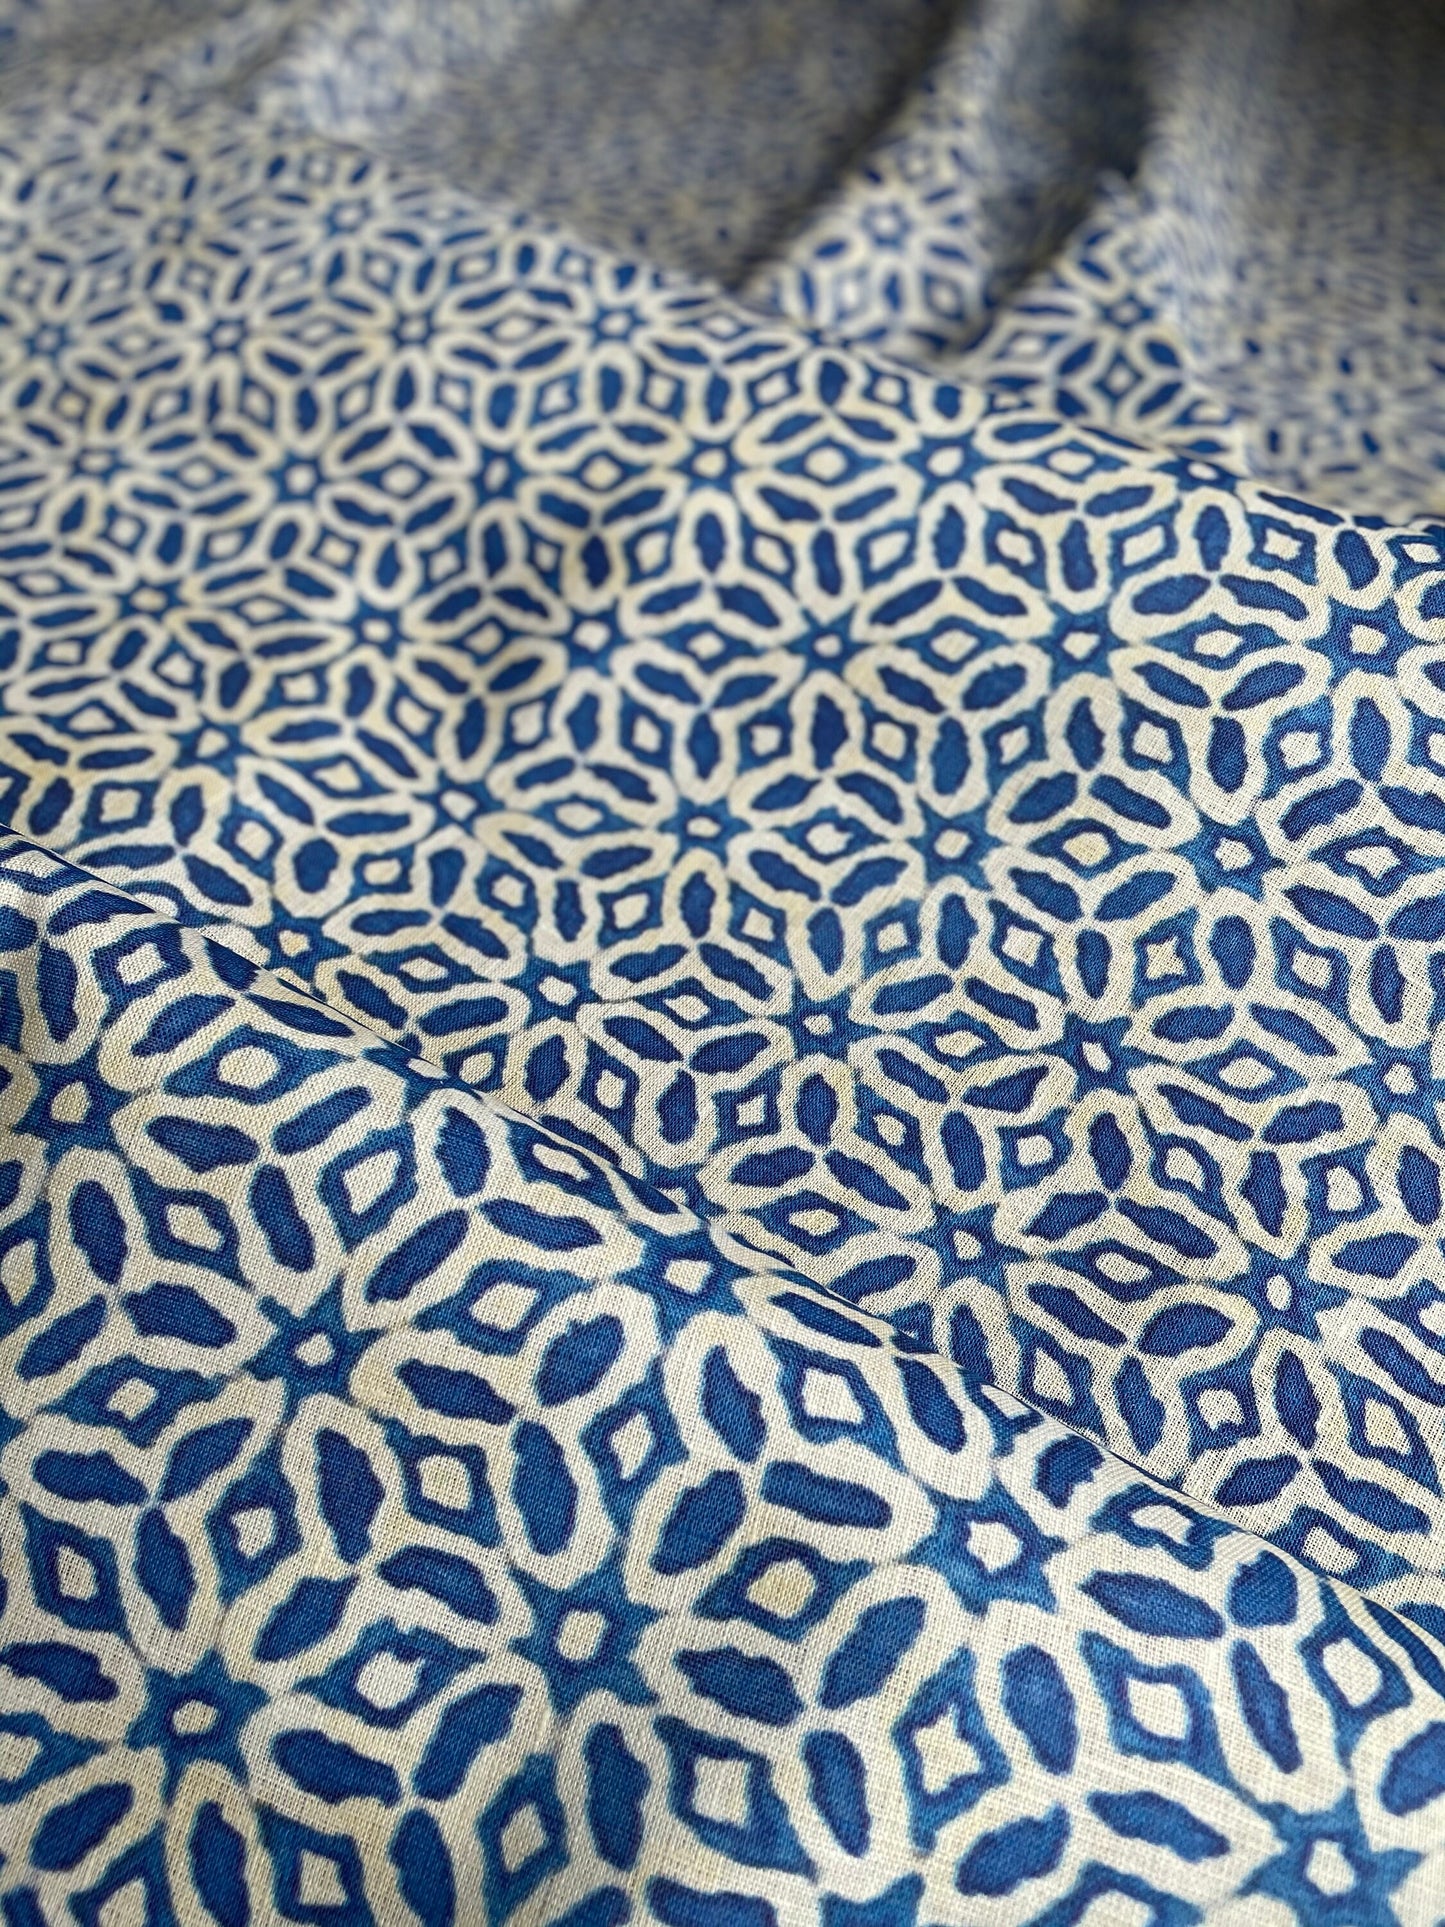 Printed Linen Fabric By The Yard Natural Stonewashed Linen Fabric For Clothing & Home Textile - Width 148 cm/1.62yd